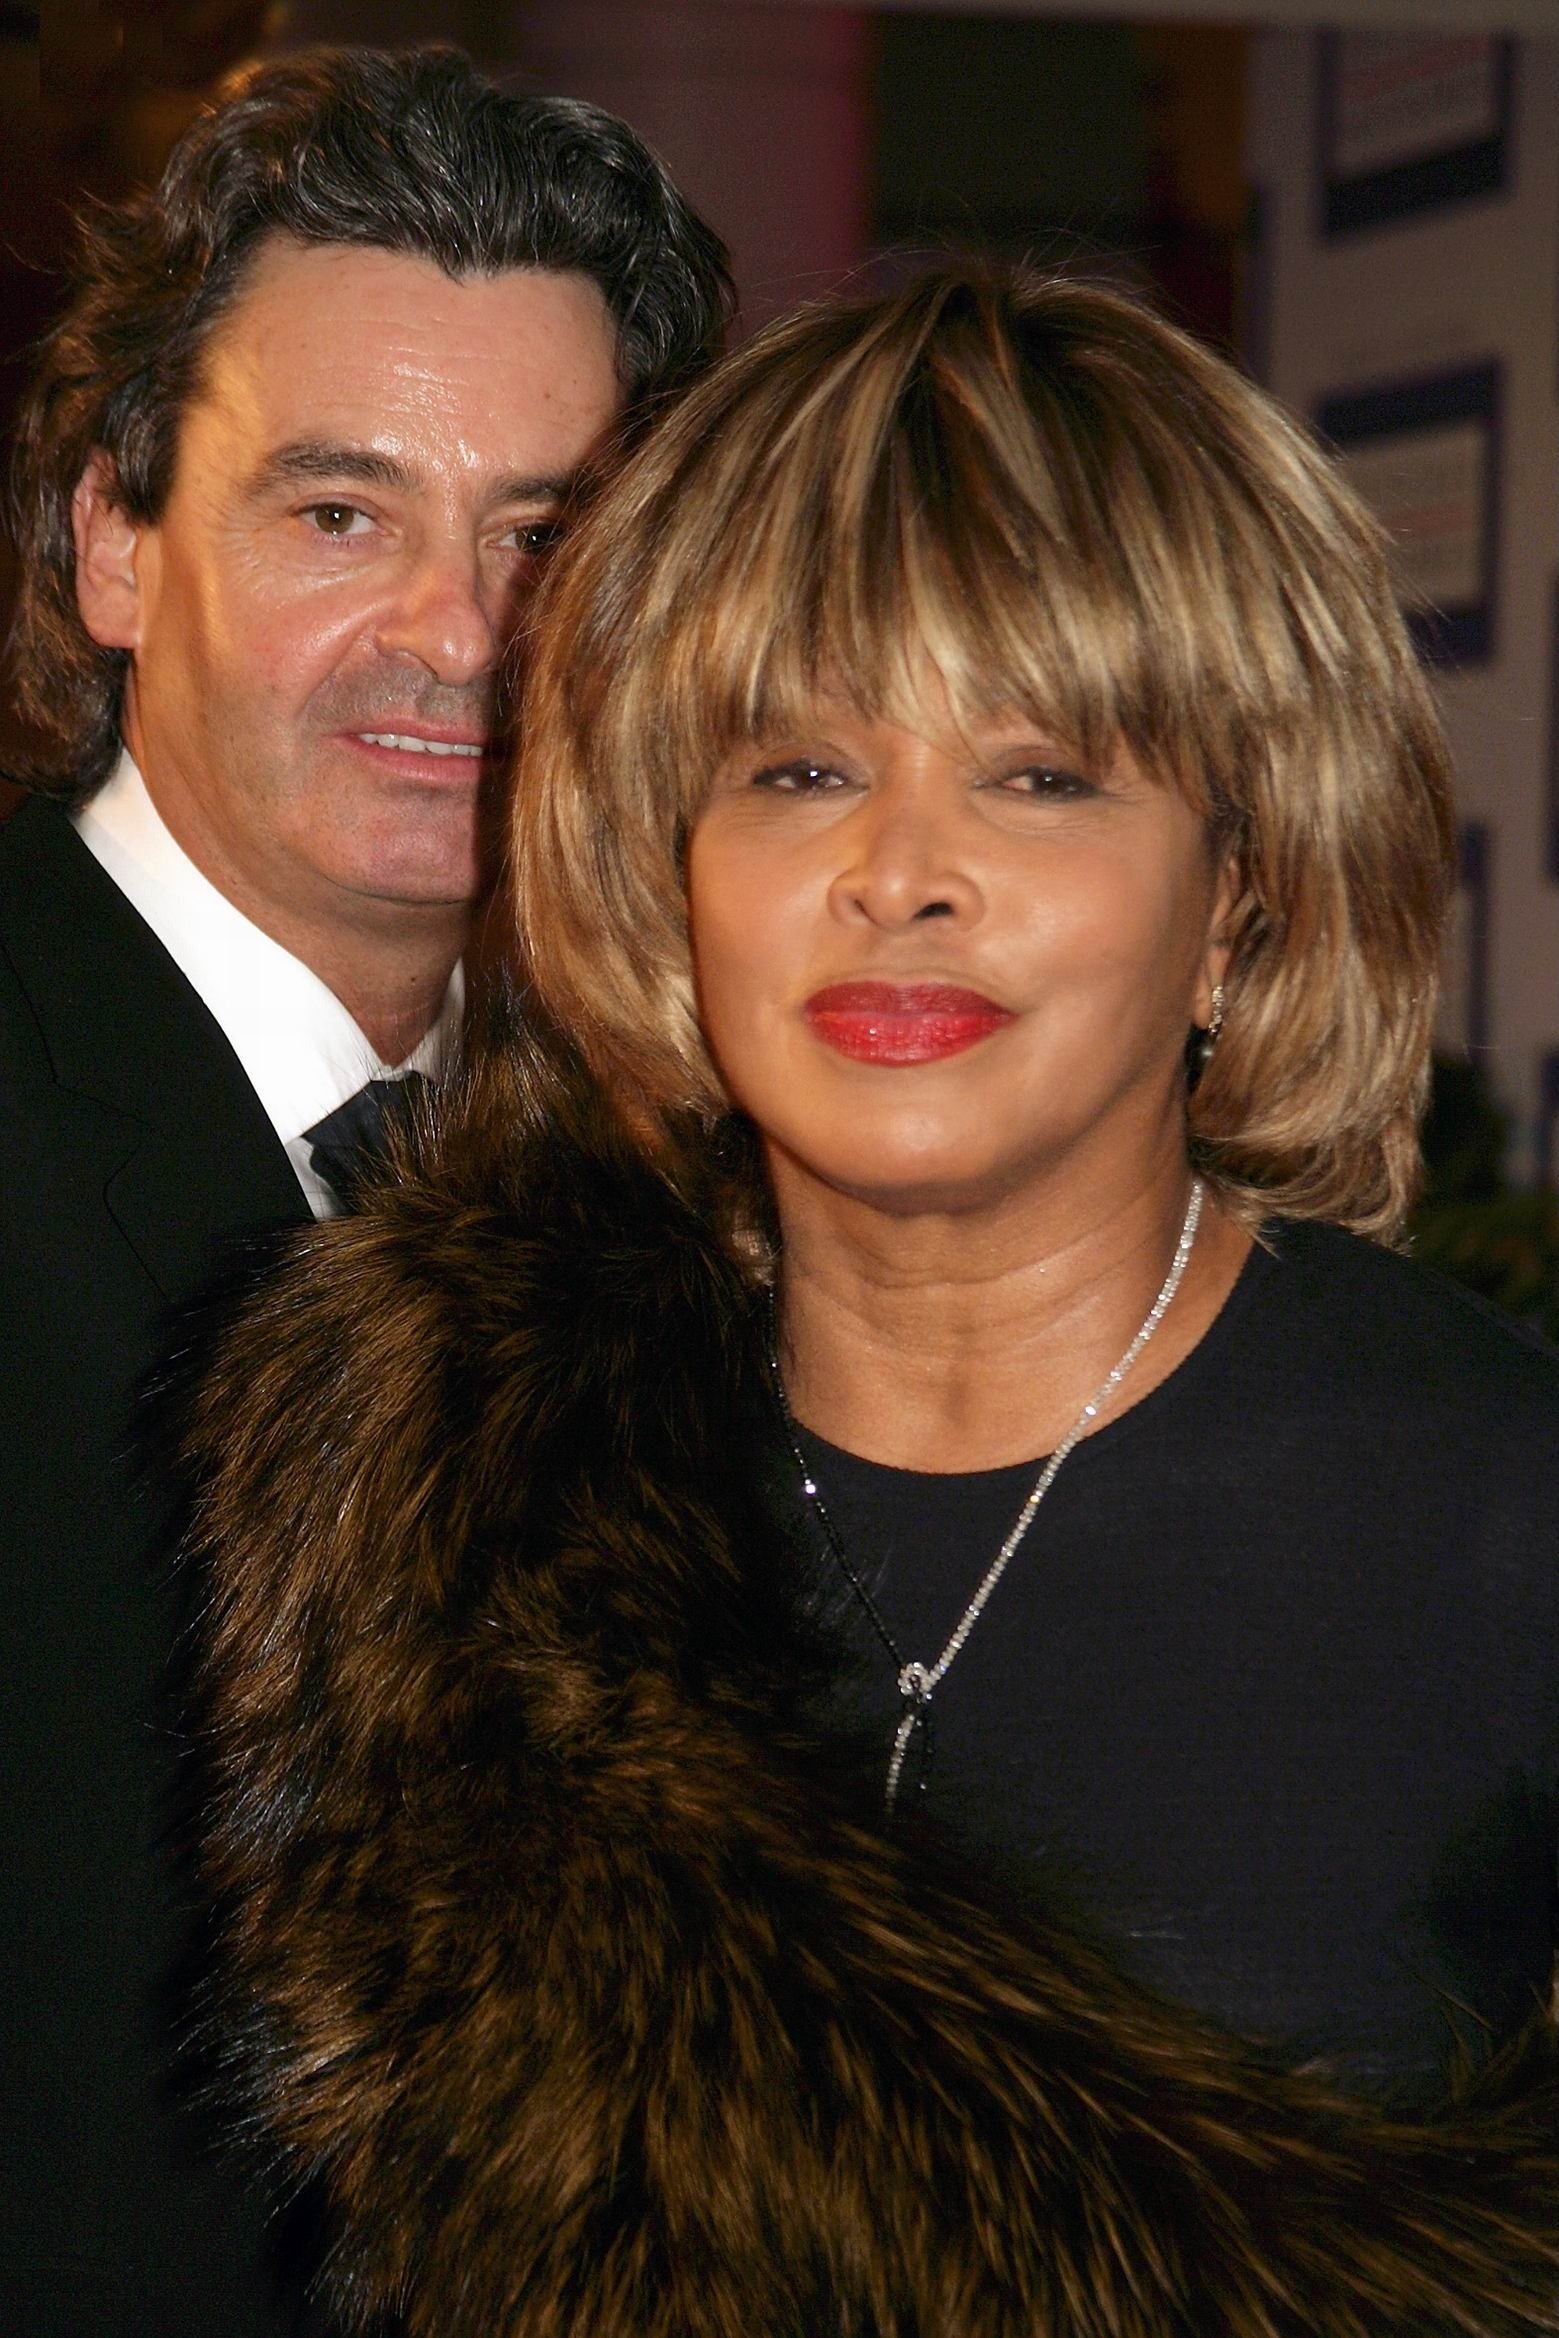 Tina Turner with her partner Erwin Bach at the presentation of the German Media Prize, Baden-Baden, February 13, 2005. | Source: Getty Images